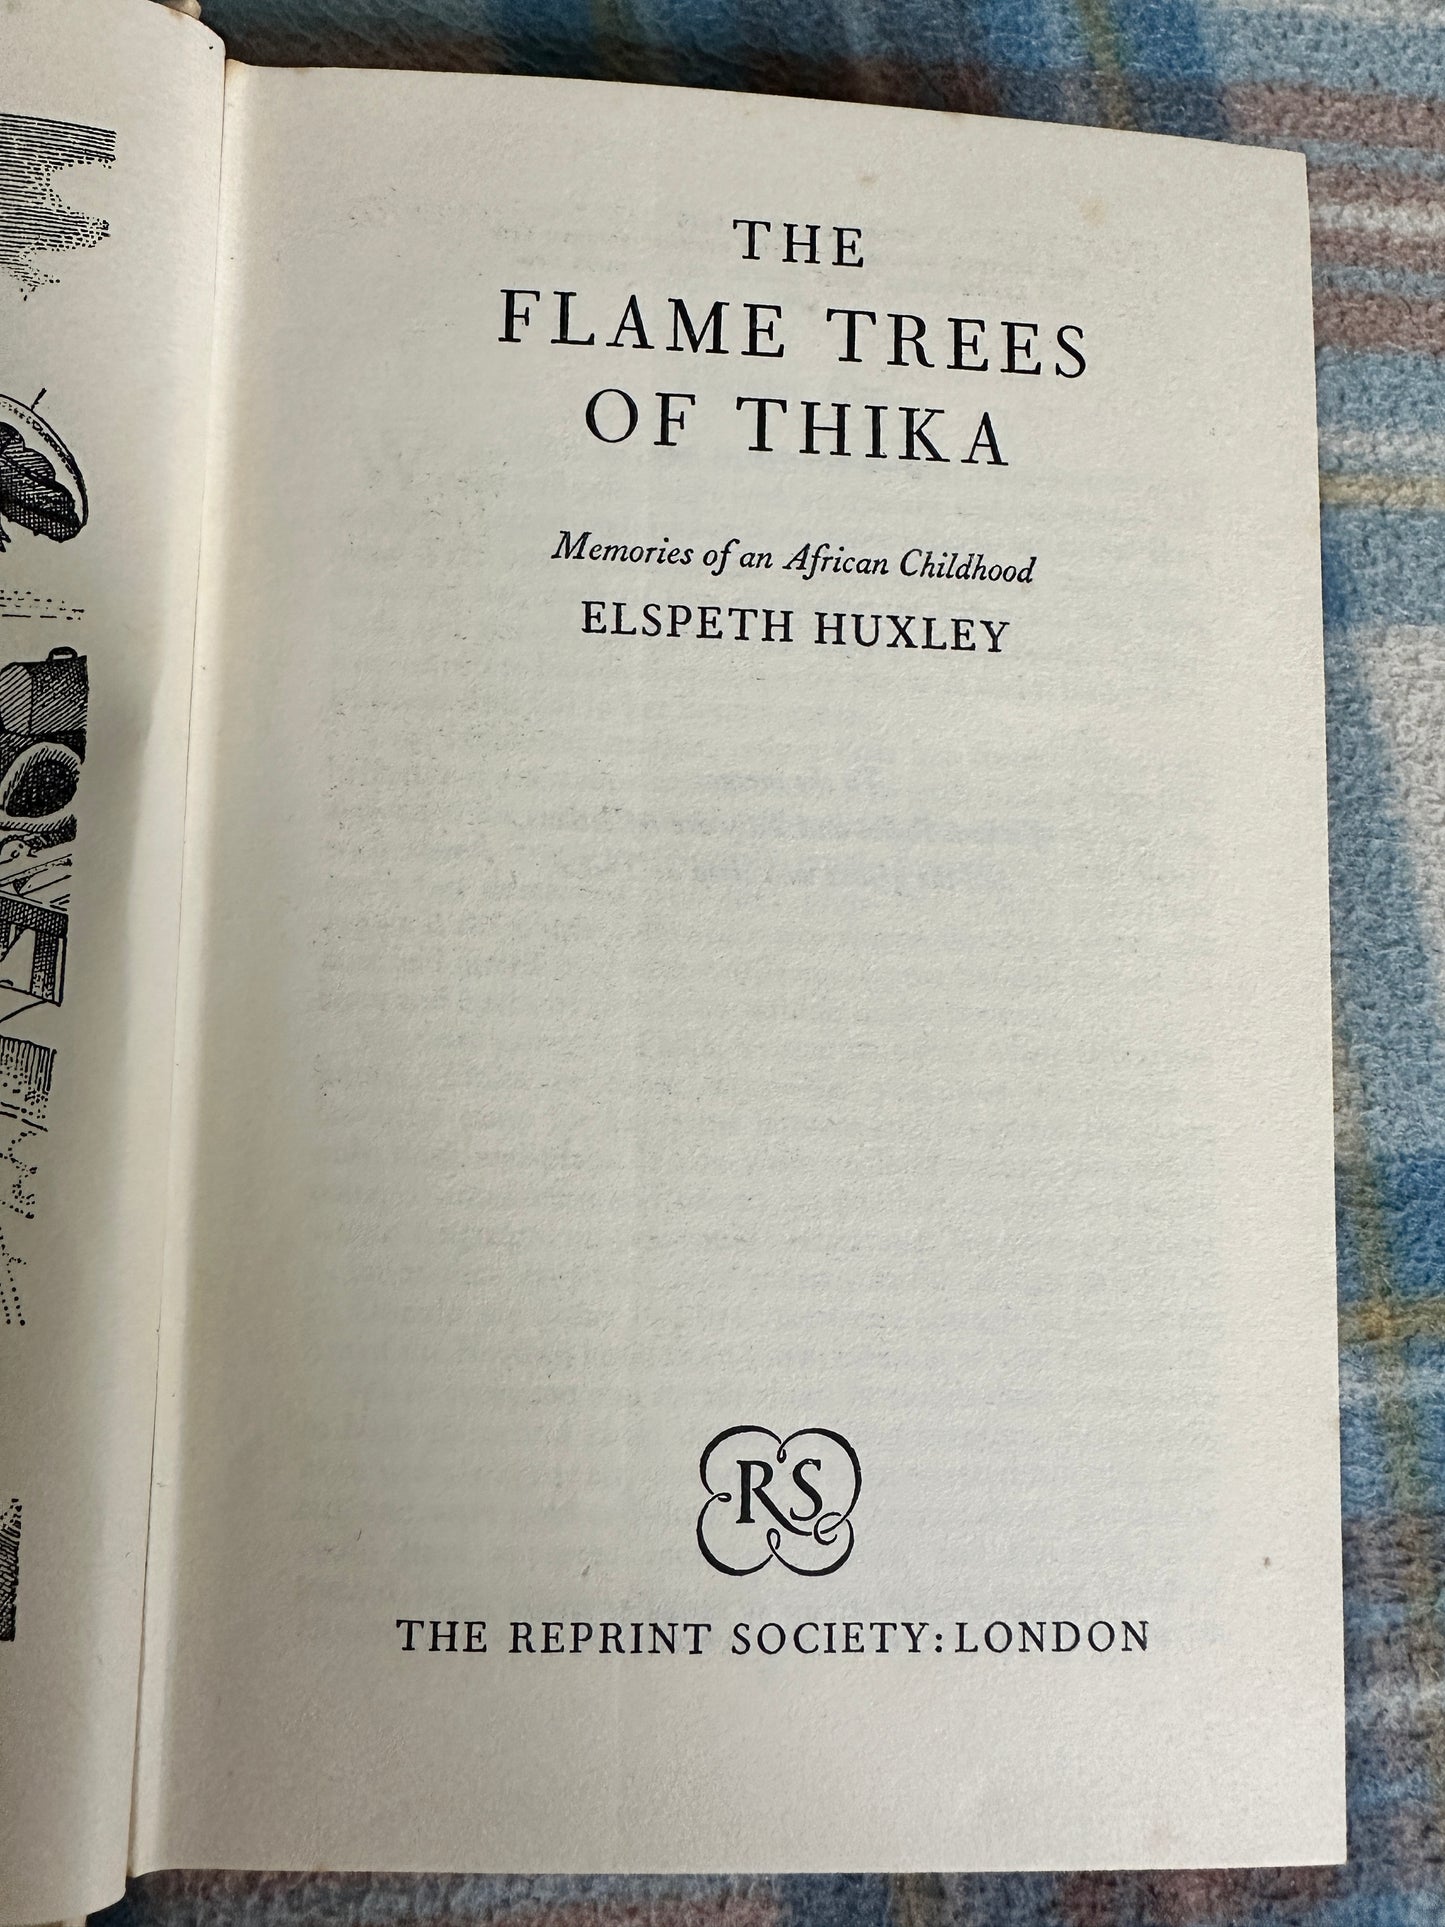 1960 The Flame Trees Of Thika - Elspeth Huxley(Reprint Society)